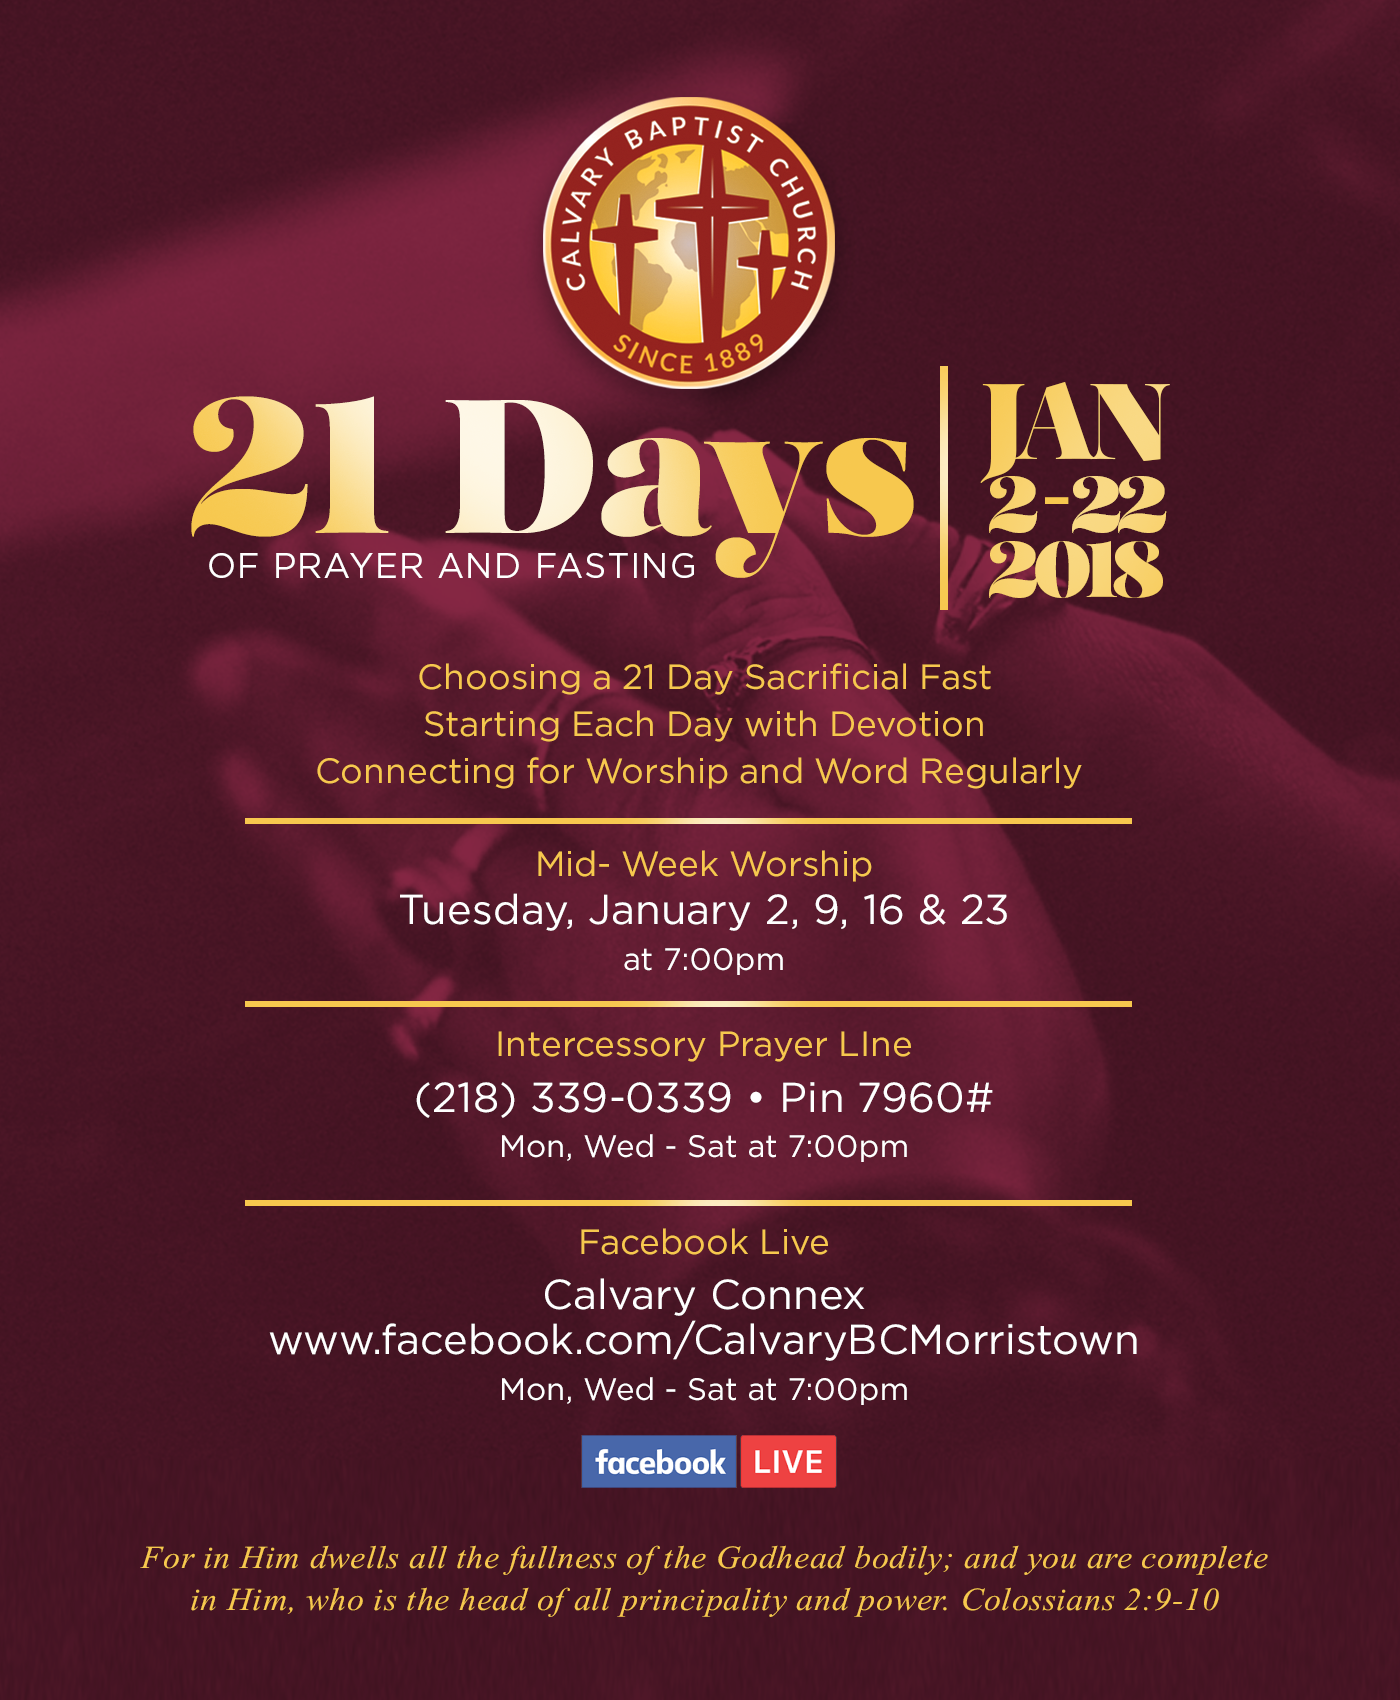 21 days of prayer and fasting guide